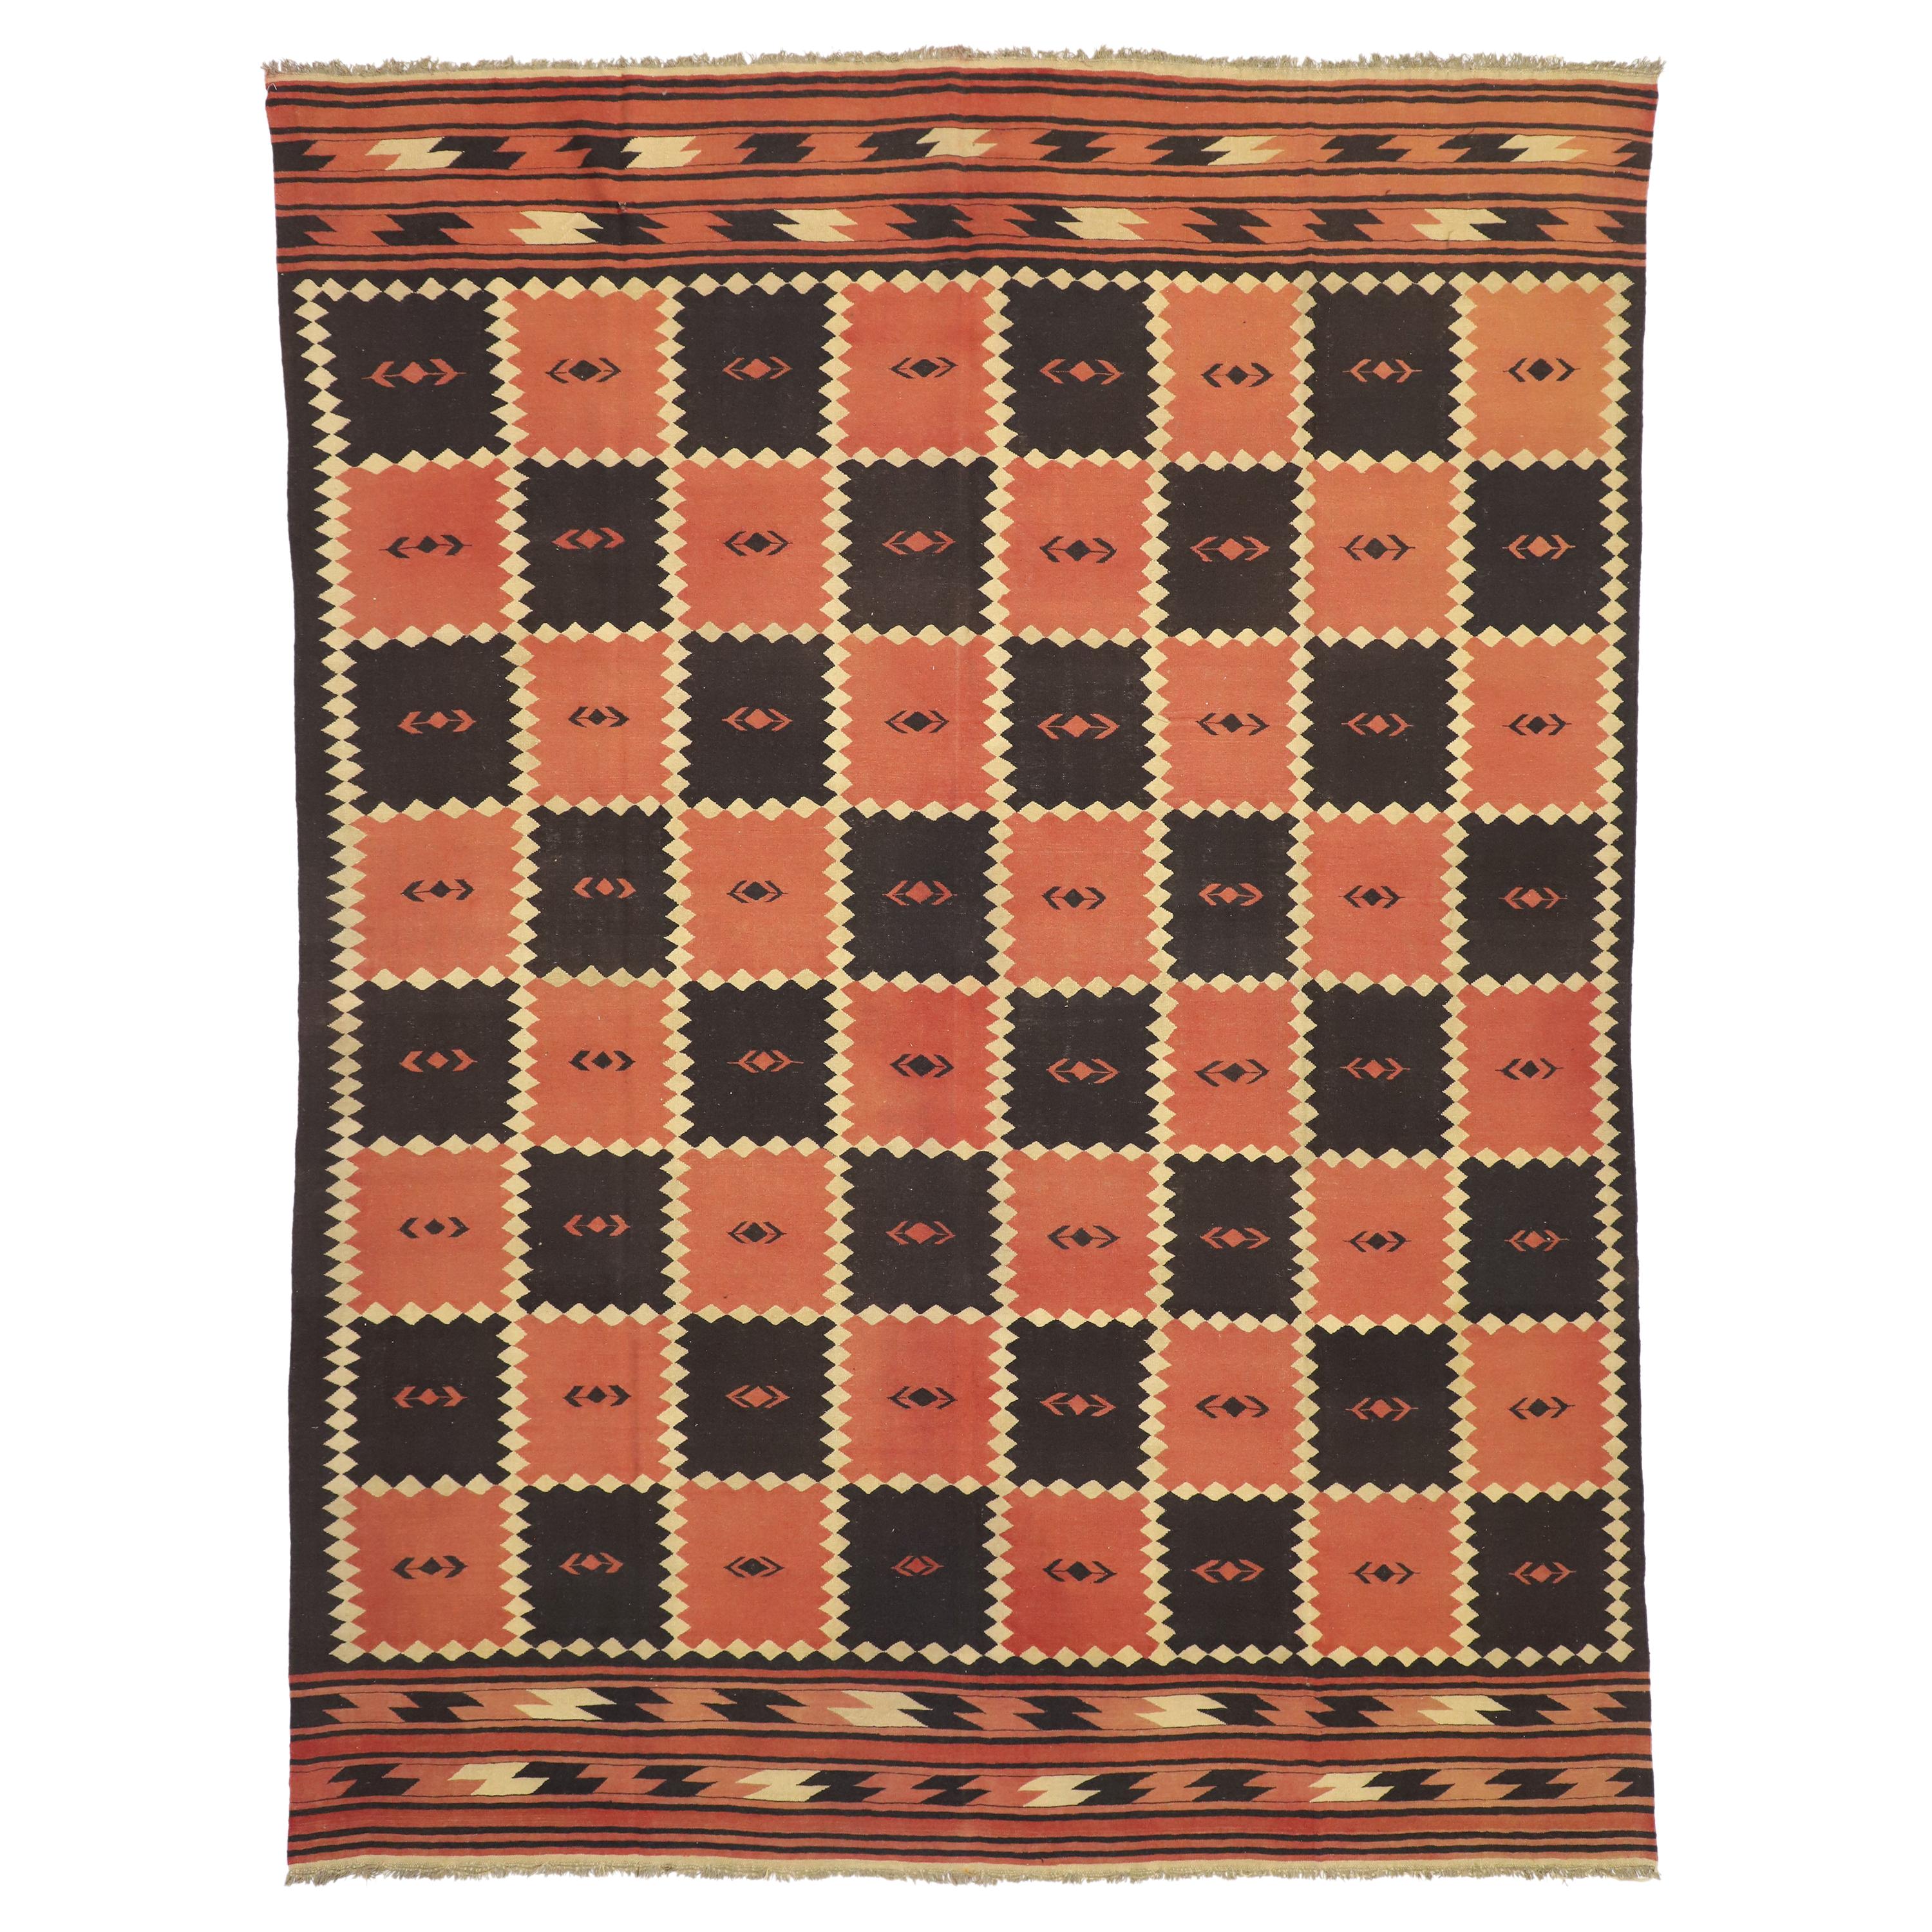 Vintage Afghani Kilim Rug with Checkerboard Design and Modern Tribal Style For Sale